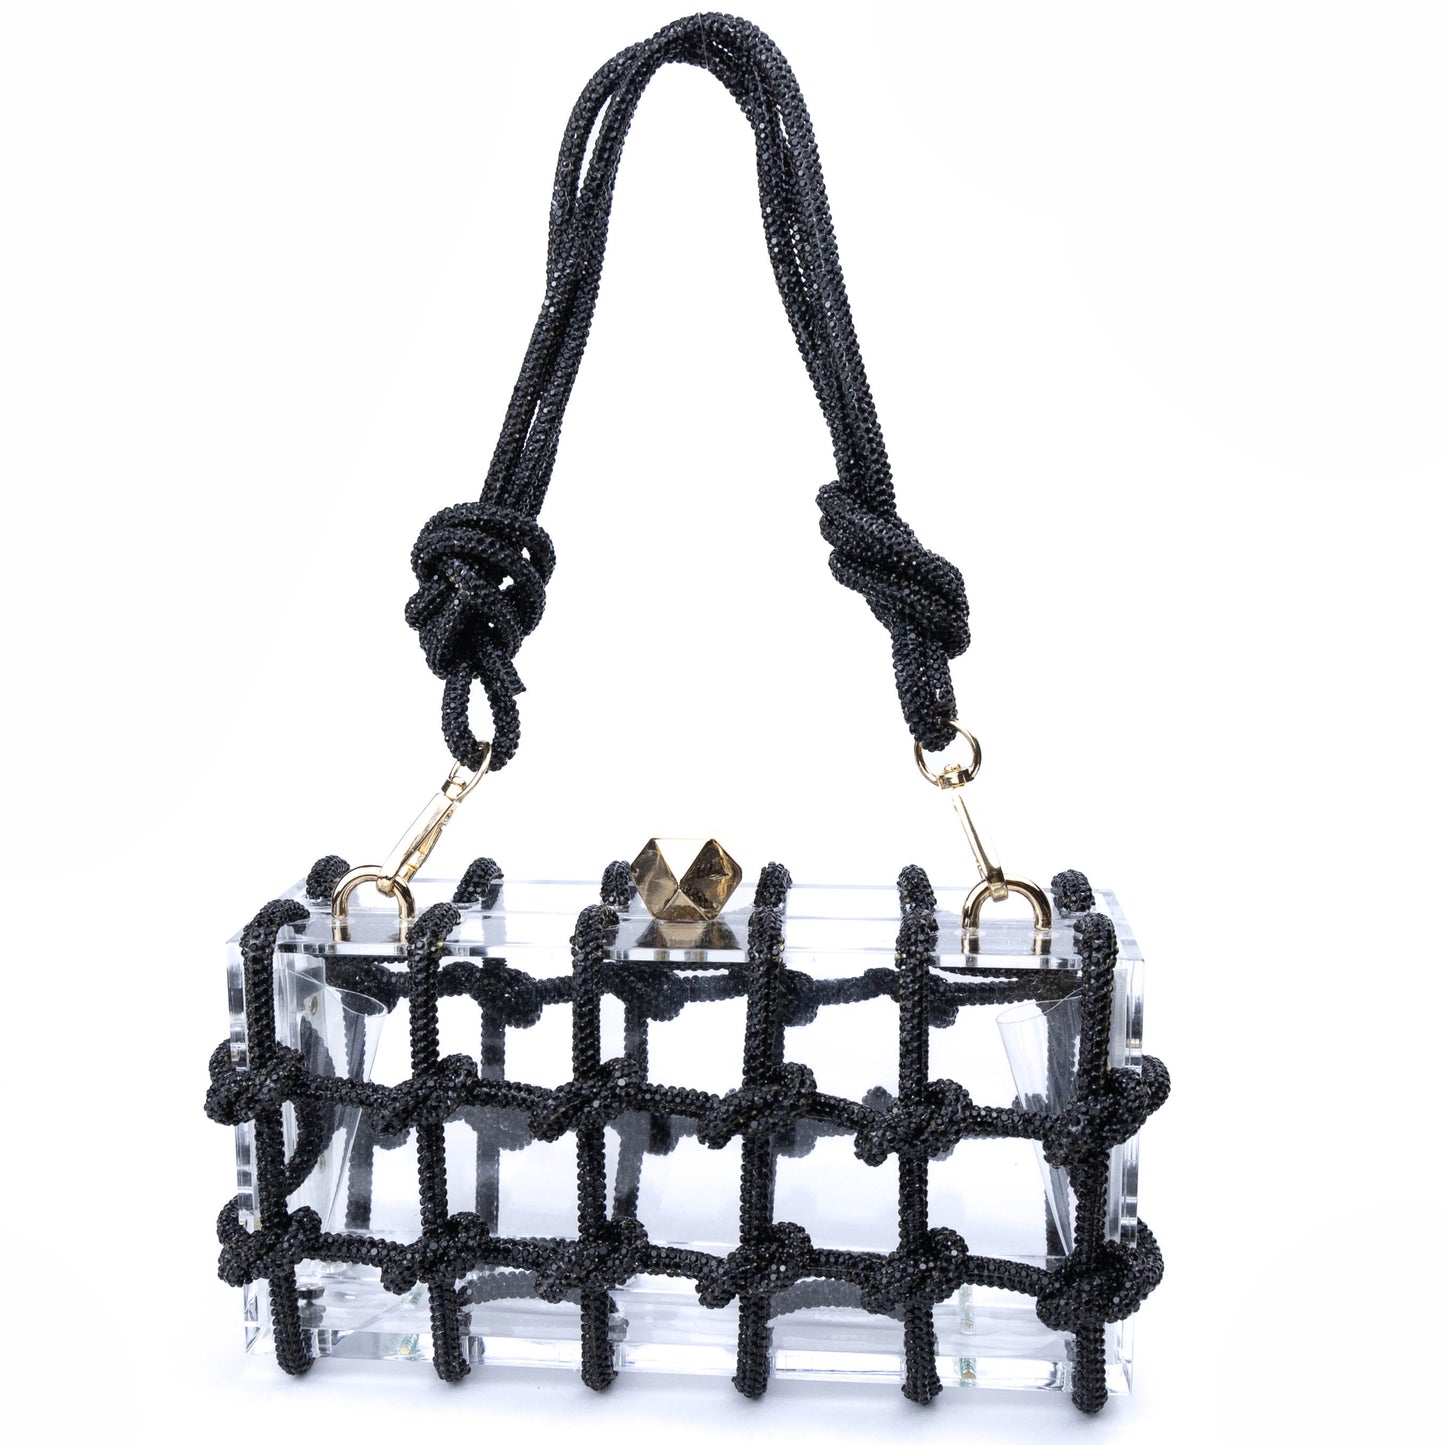 The Clear Crystal Rope Black